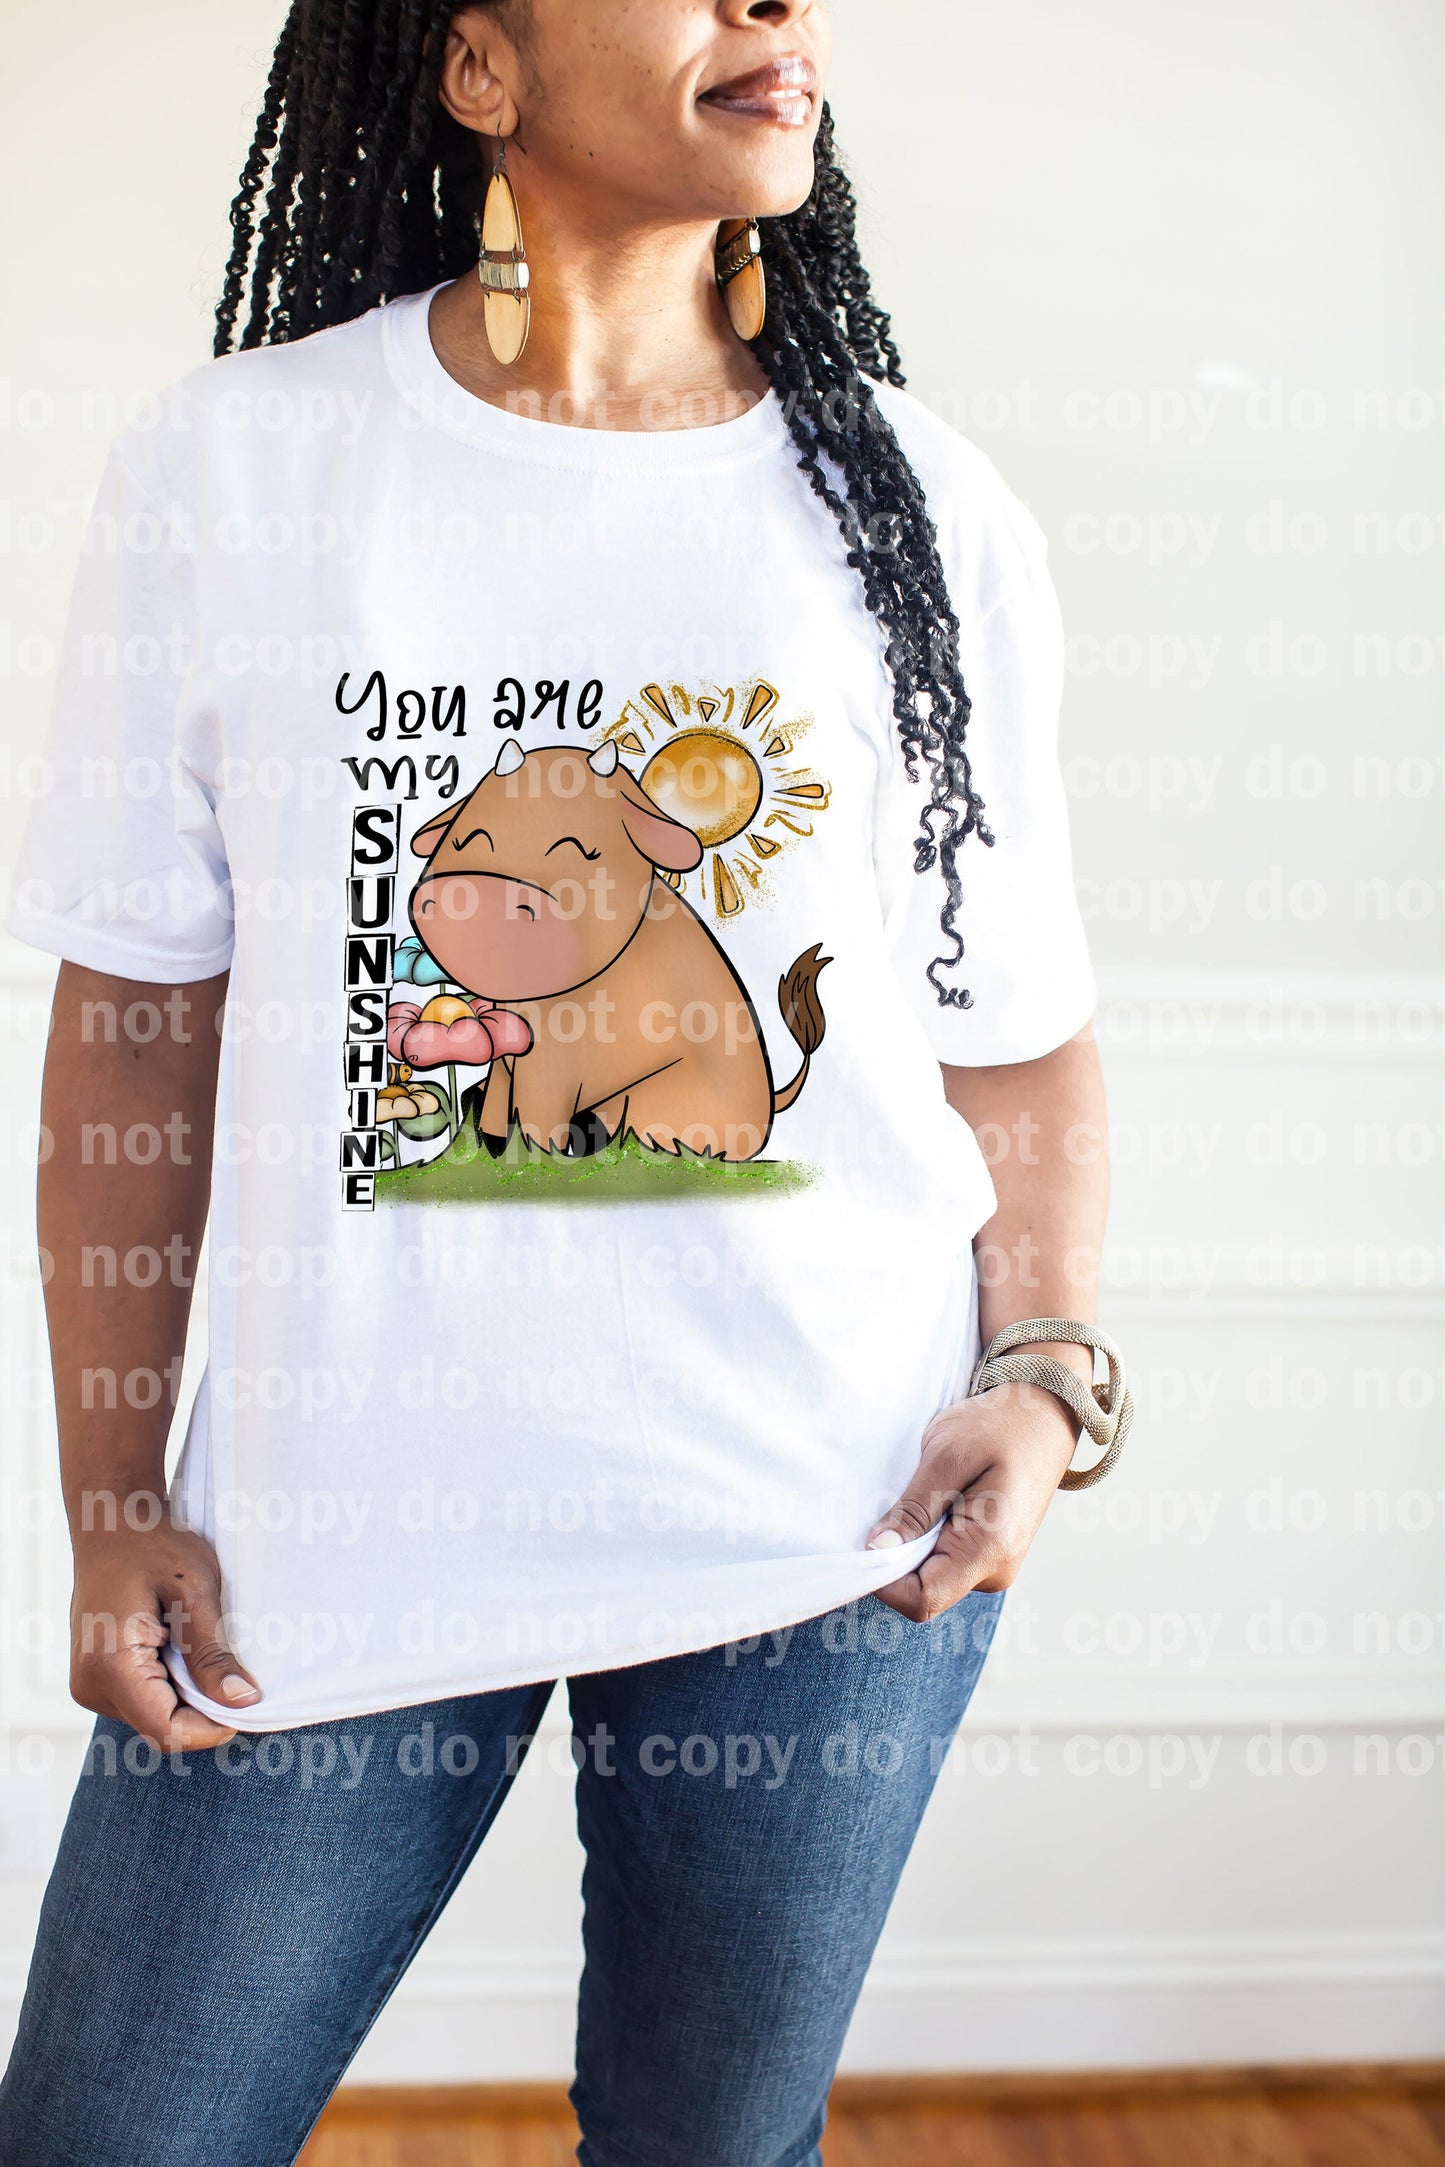 You Are My Sunshine Dream Print or Sublimation Print